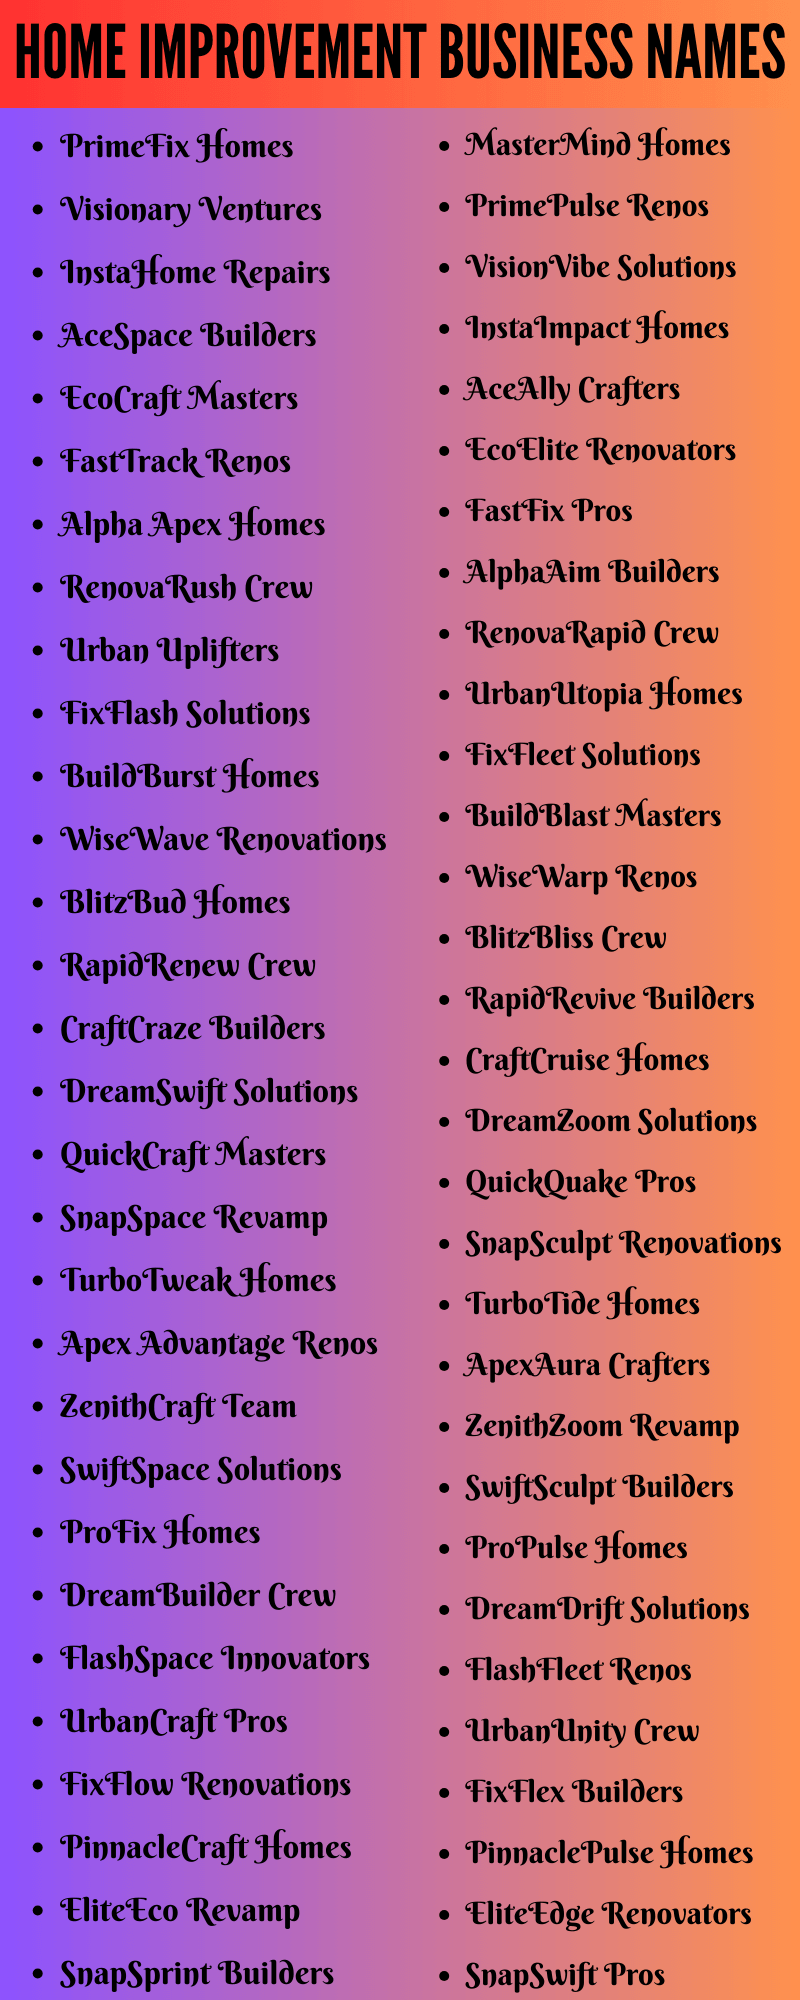 Home Improvement Business Names